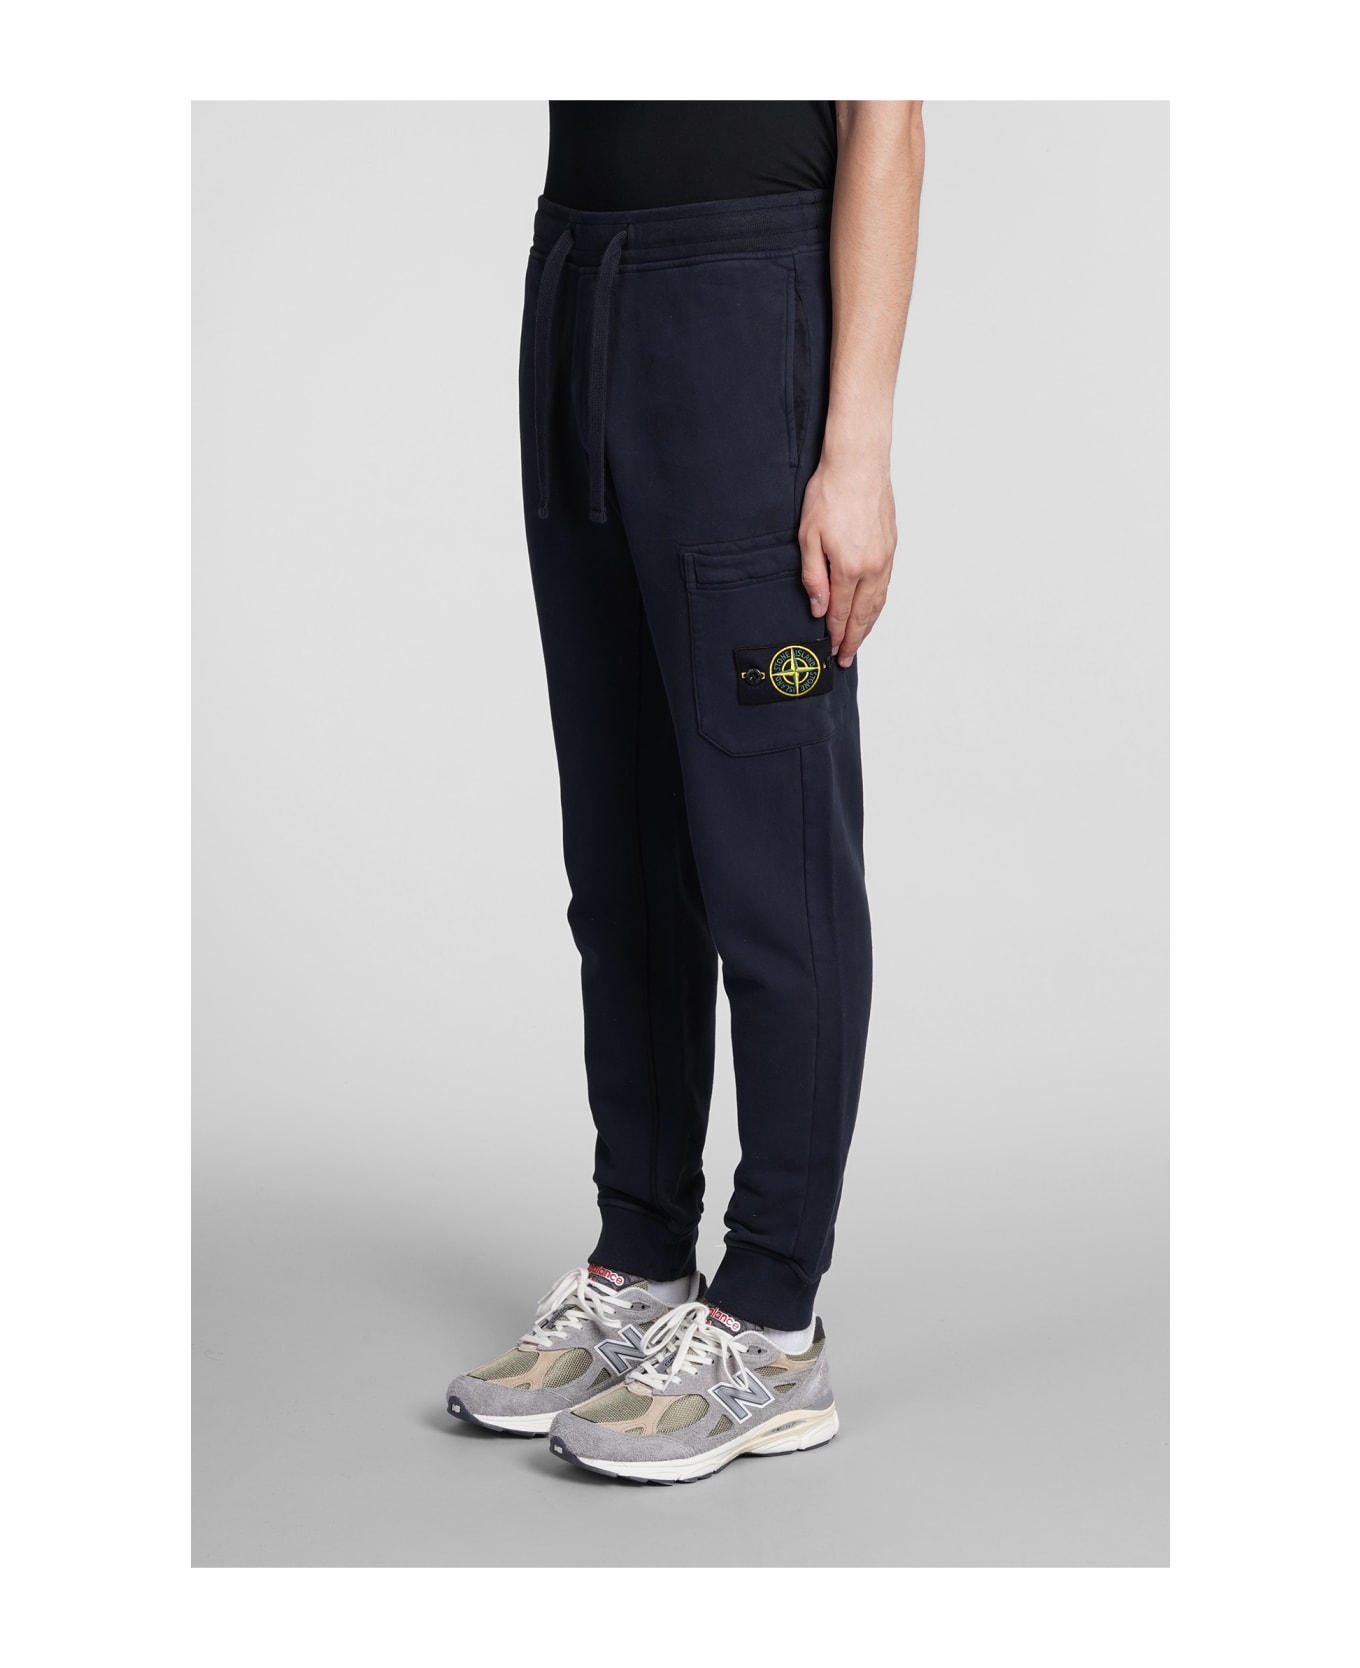 Stone Island Pants In Blue Cotton - Navy blue